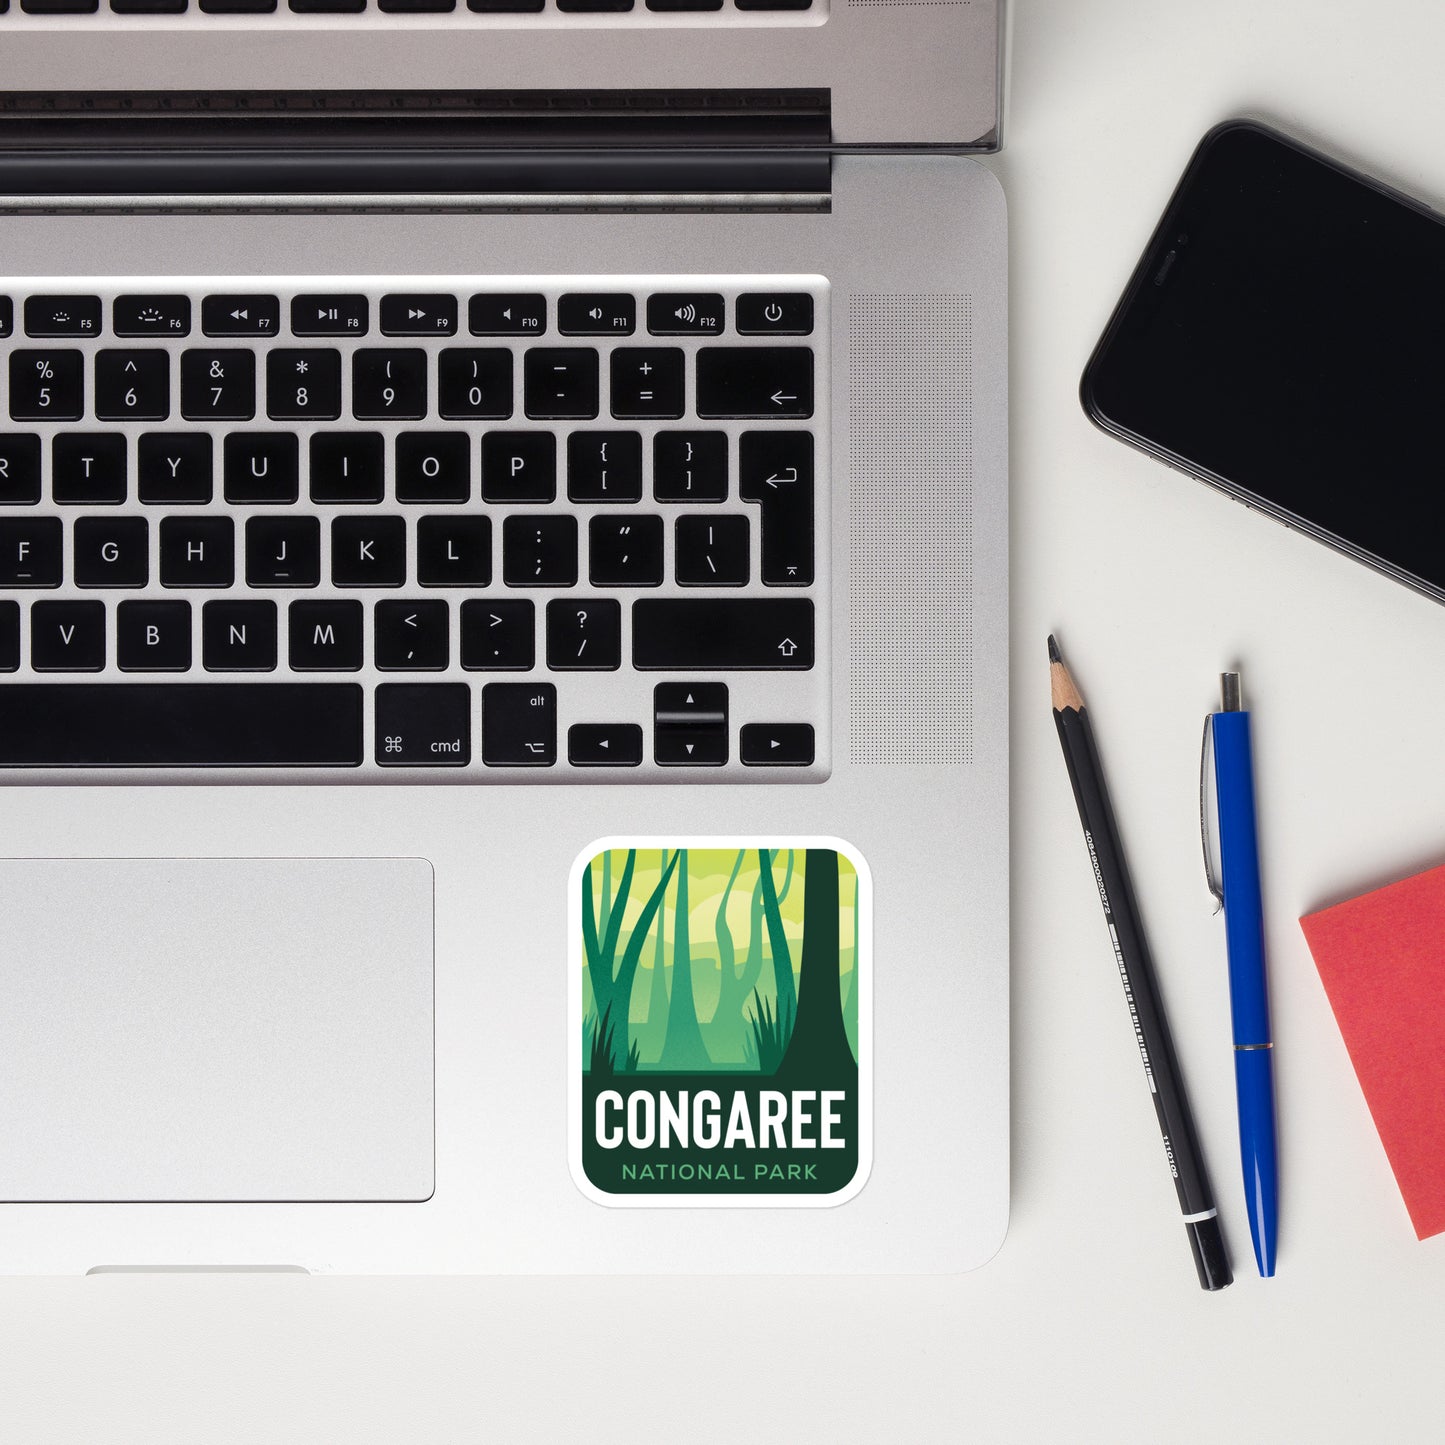 A sticker of Congaree National Park on a laptop